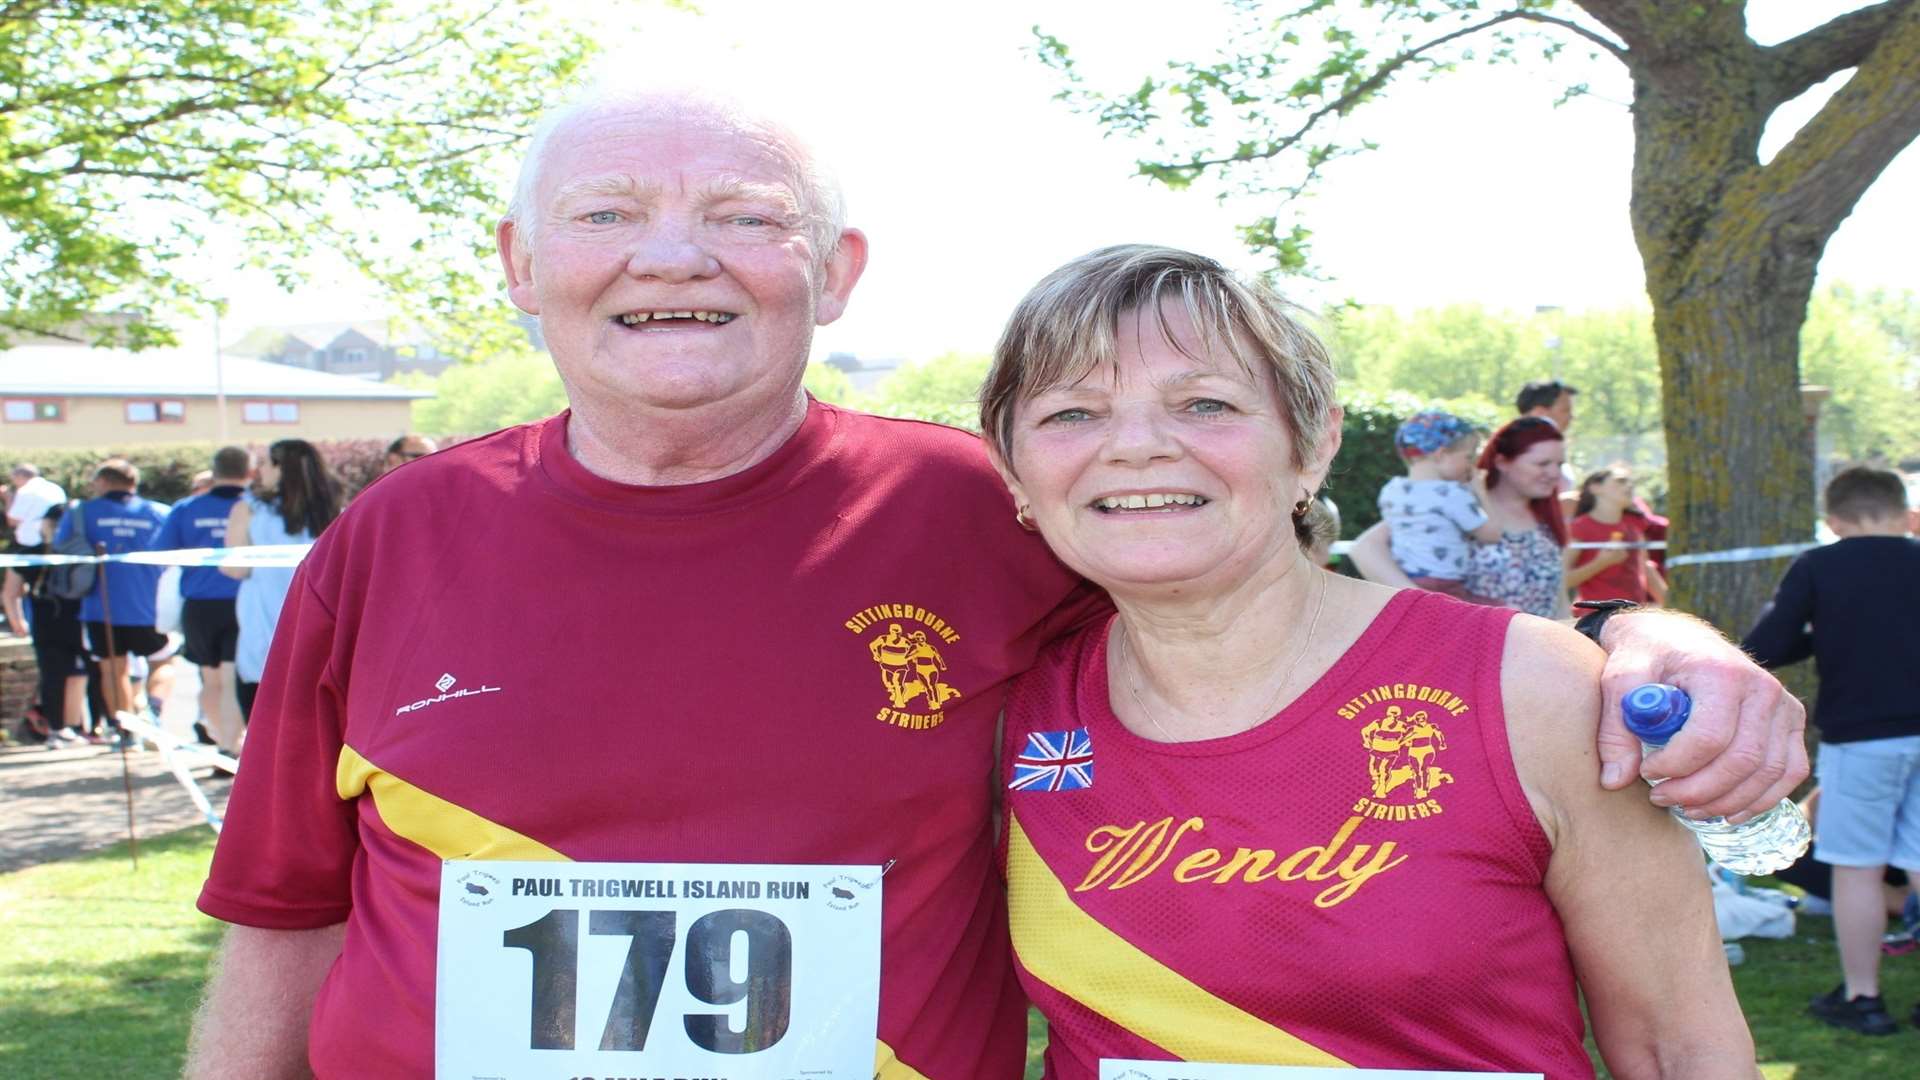 Two of the oldest runners Robert Holmes, 70, and Wendy Knee, 62, both of Sittingbourne Striders, crossed the finishing line hand-in-hand last year. But colleague Ron Smith, 75, beat them!